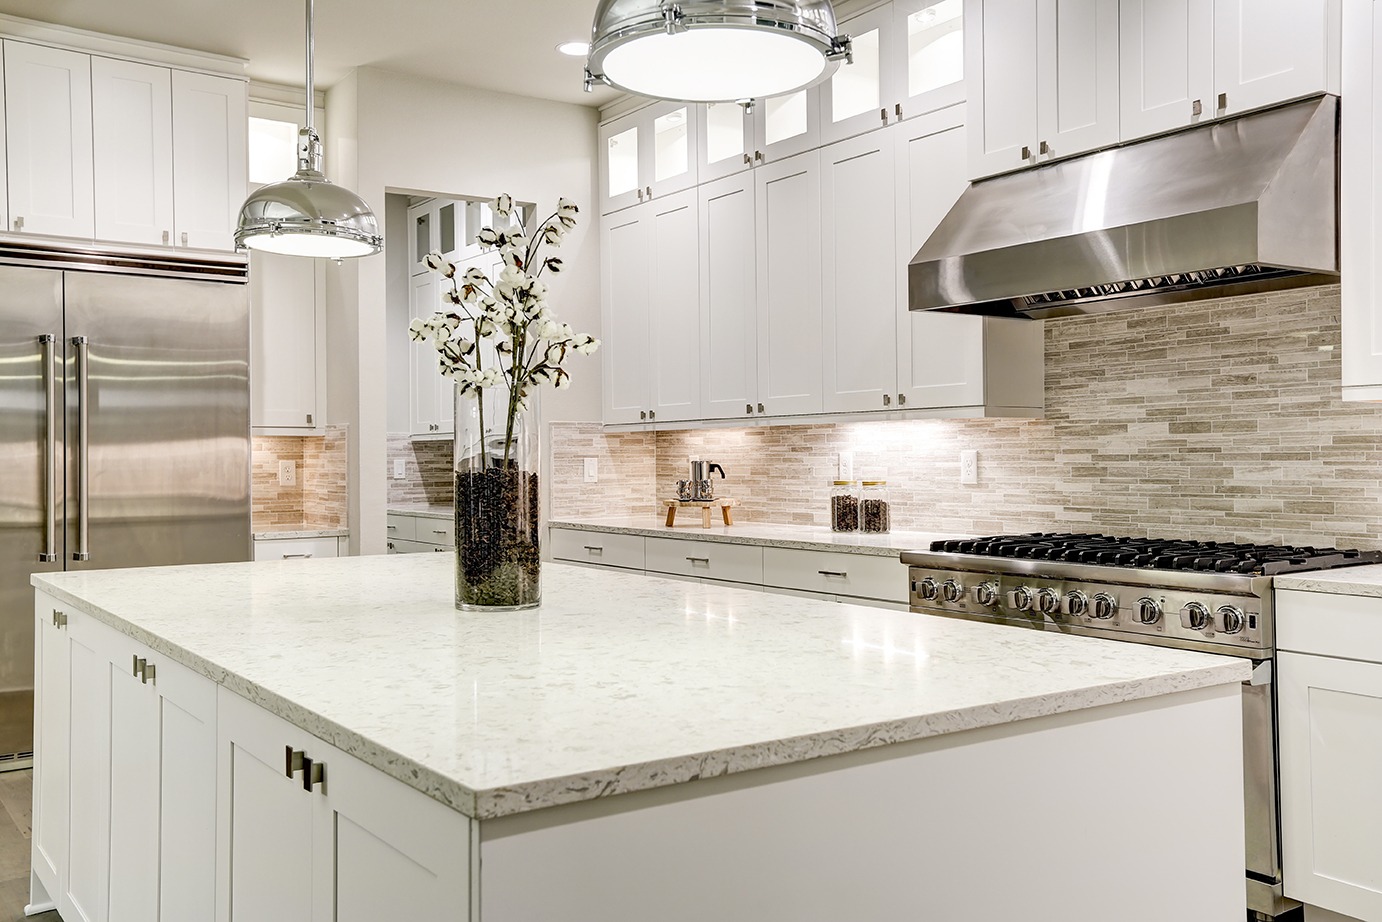 Gourmet kitchen features white shaker cabinets with marble countertops, stone subway tile backsplash, double door stainless steel refrigerator and gorgeous kitchen island.